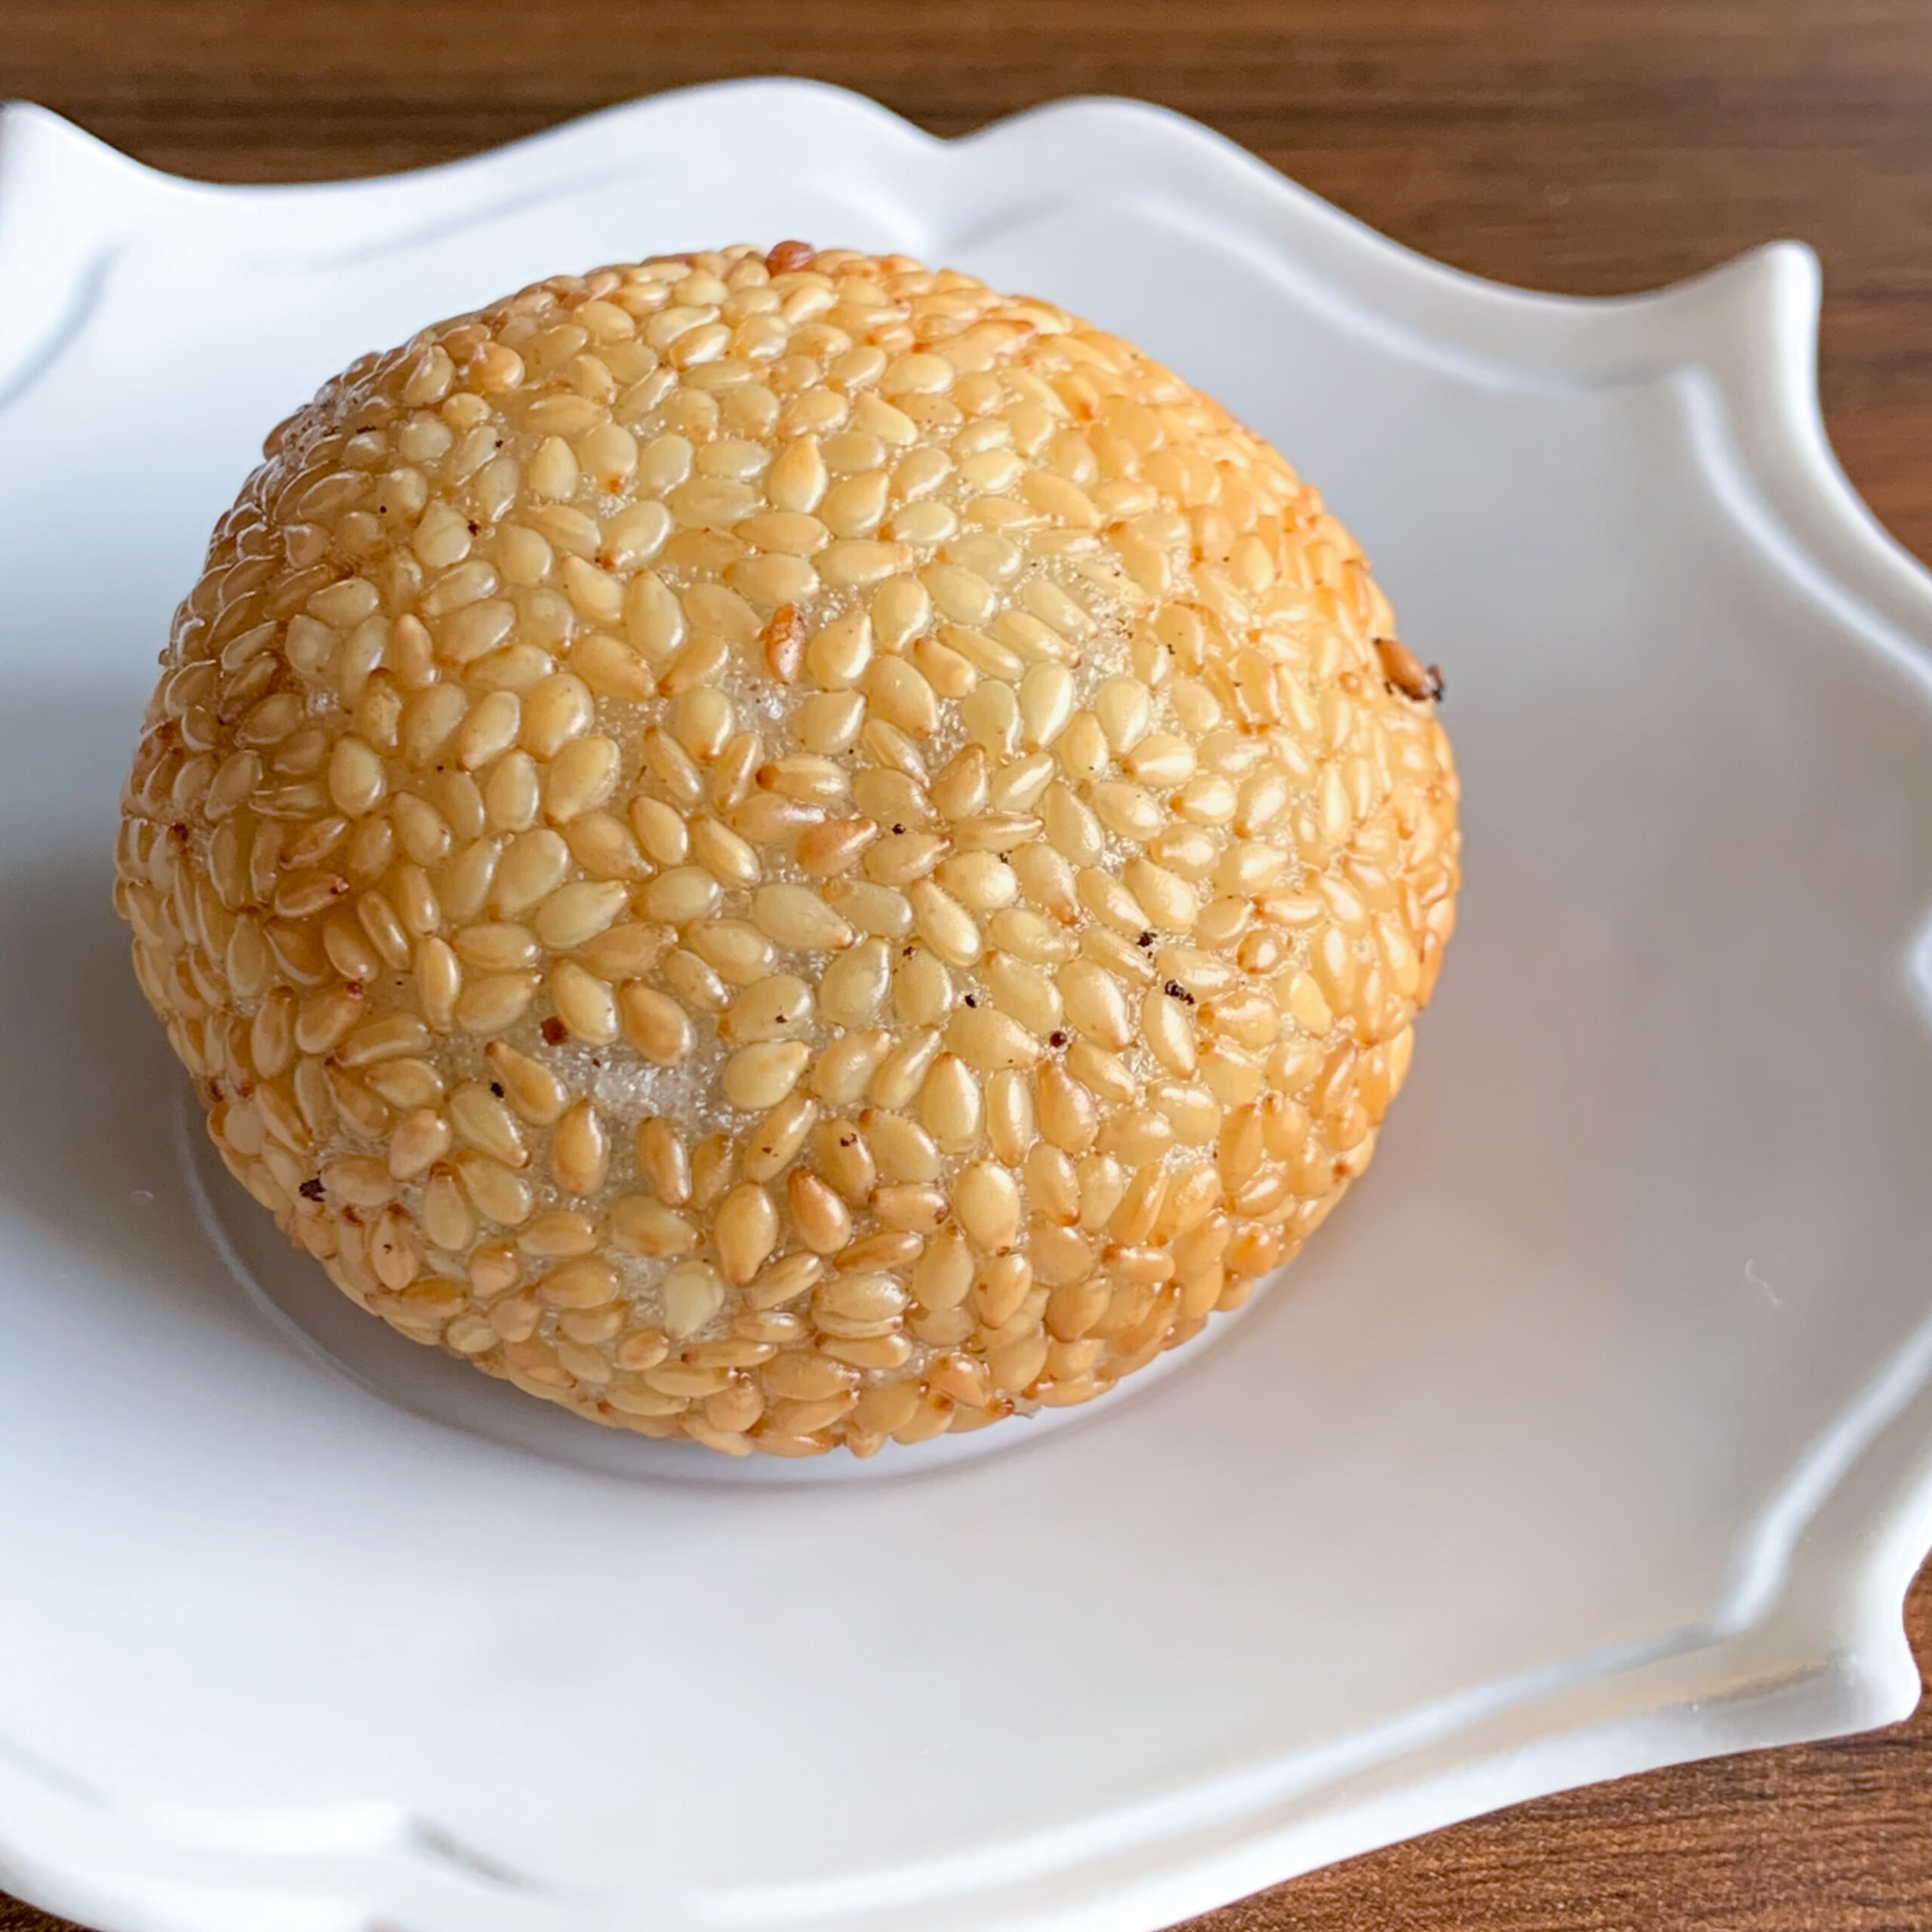 Sesame balls are sweets made from shiratama flour, red bean paste, and sesame seeds.